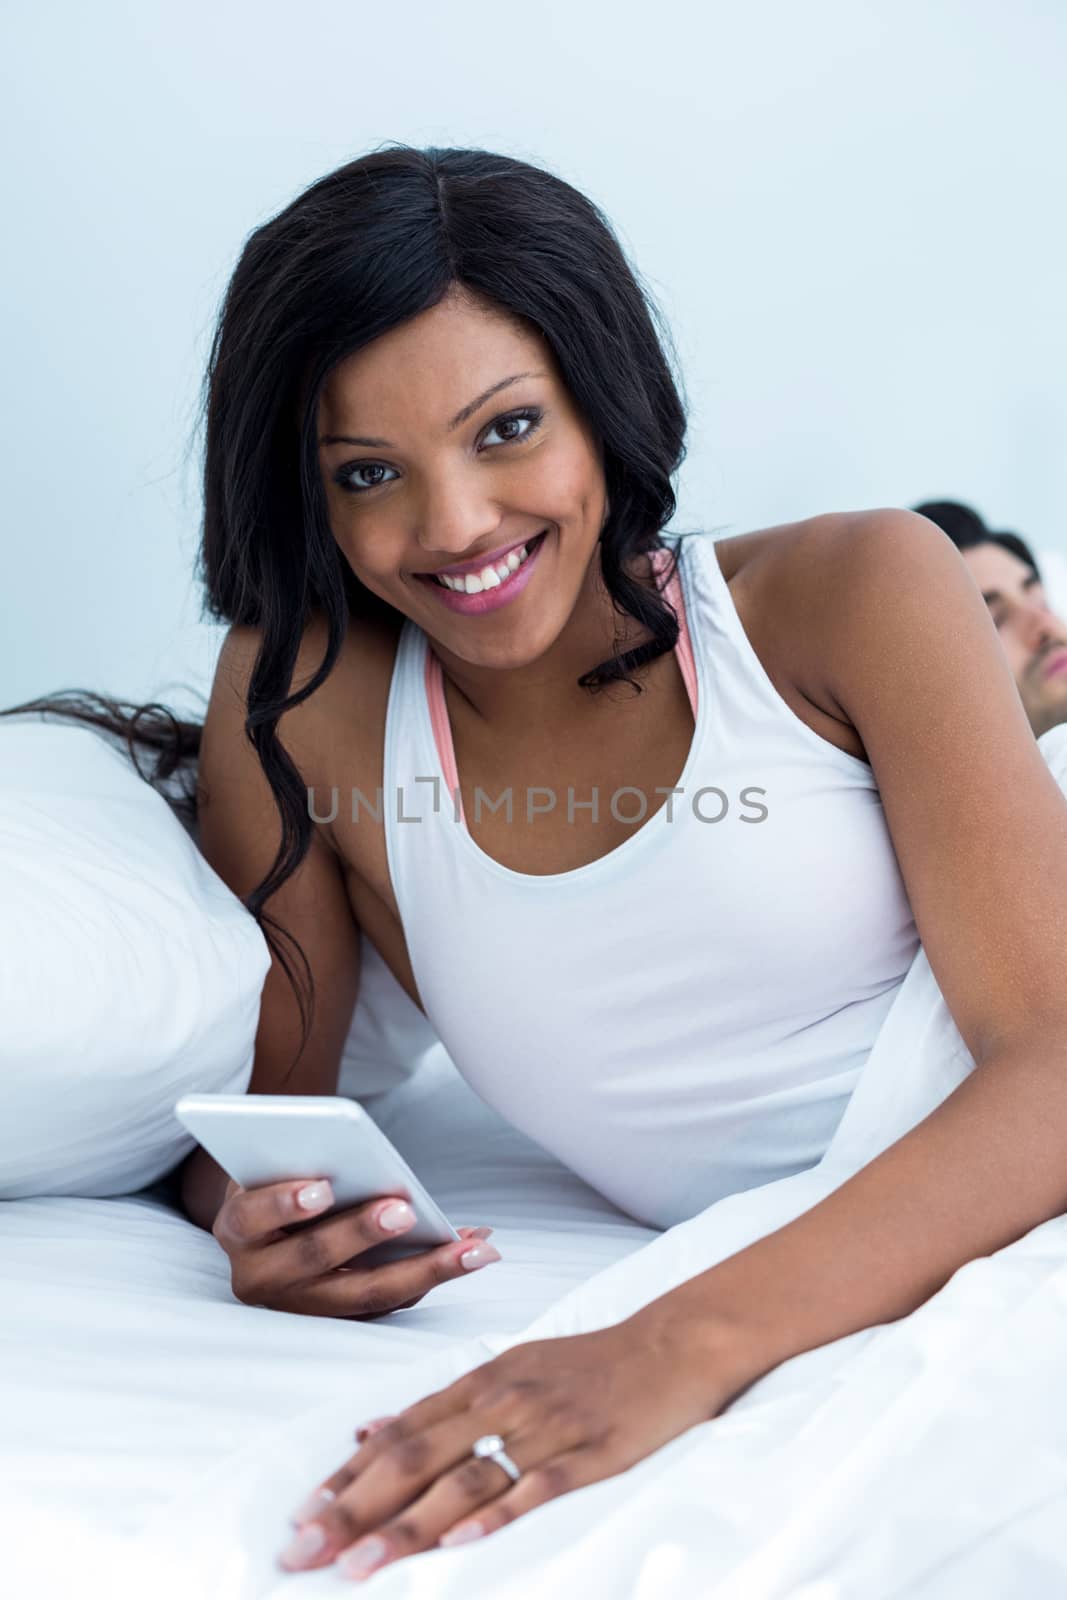 Woman using mobile phone while man sleeping on bed in bedroom